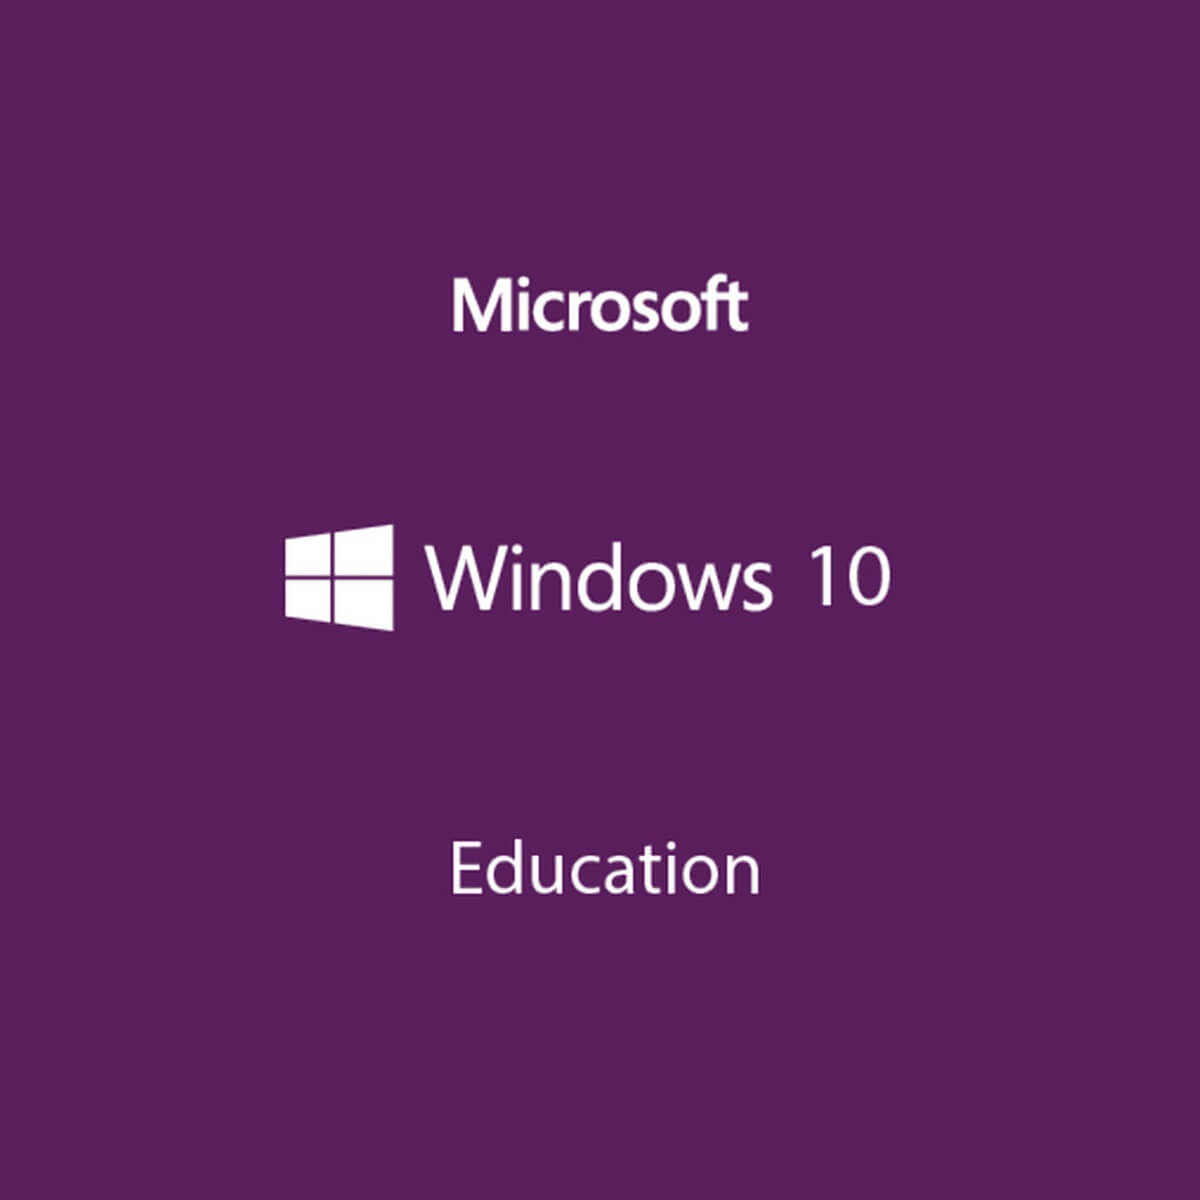 How upgrade from Windows 7 to 10 Education